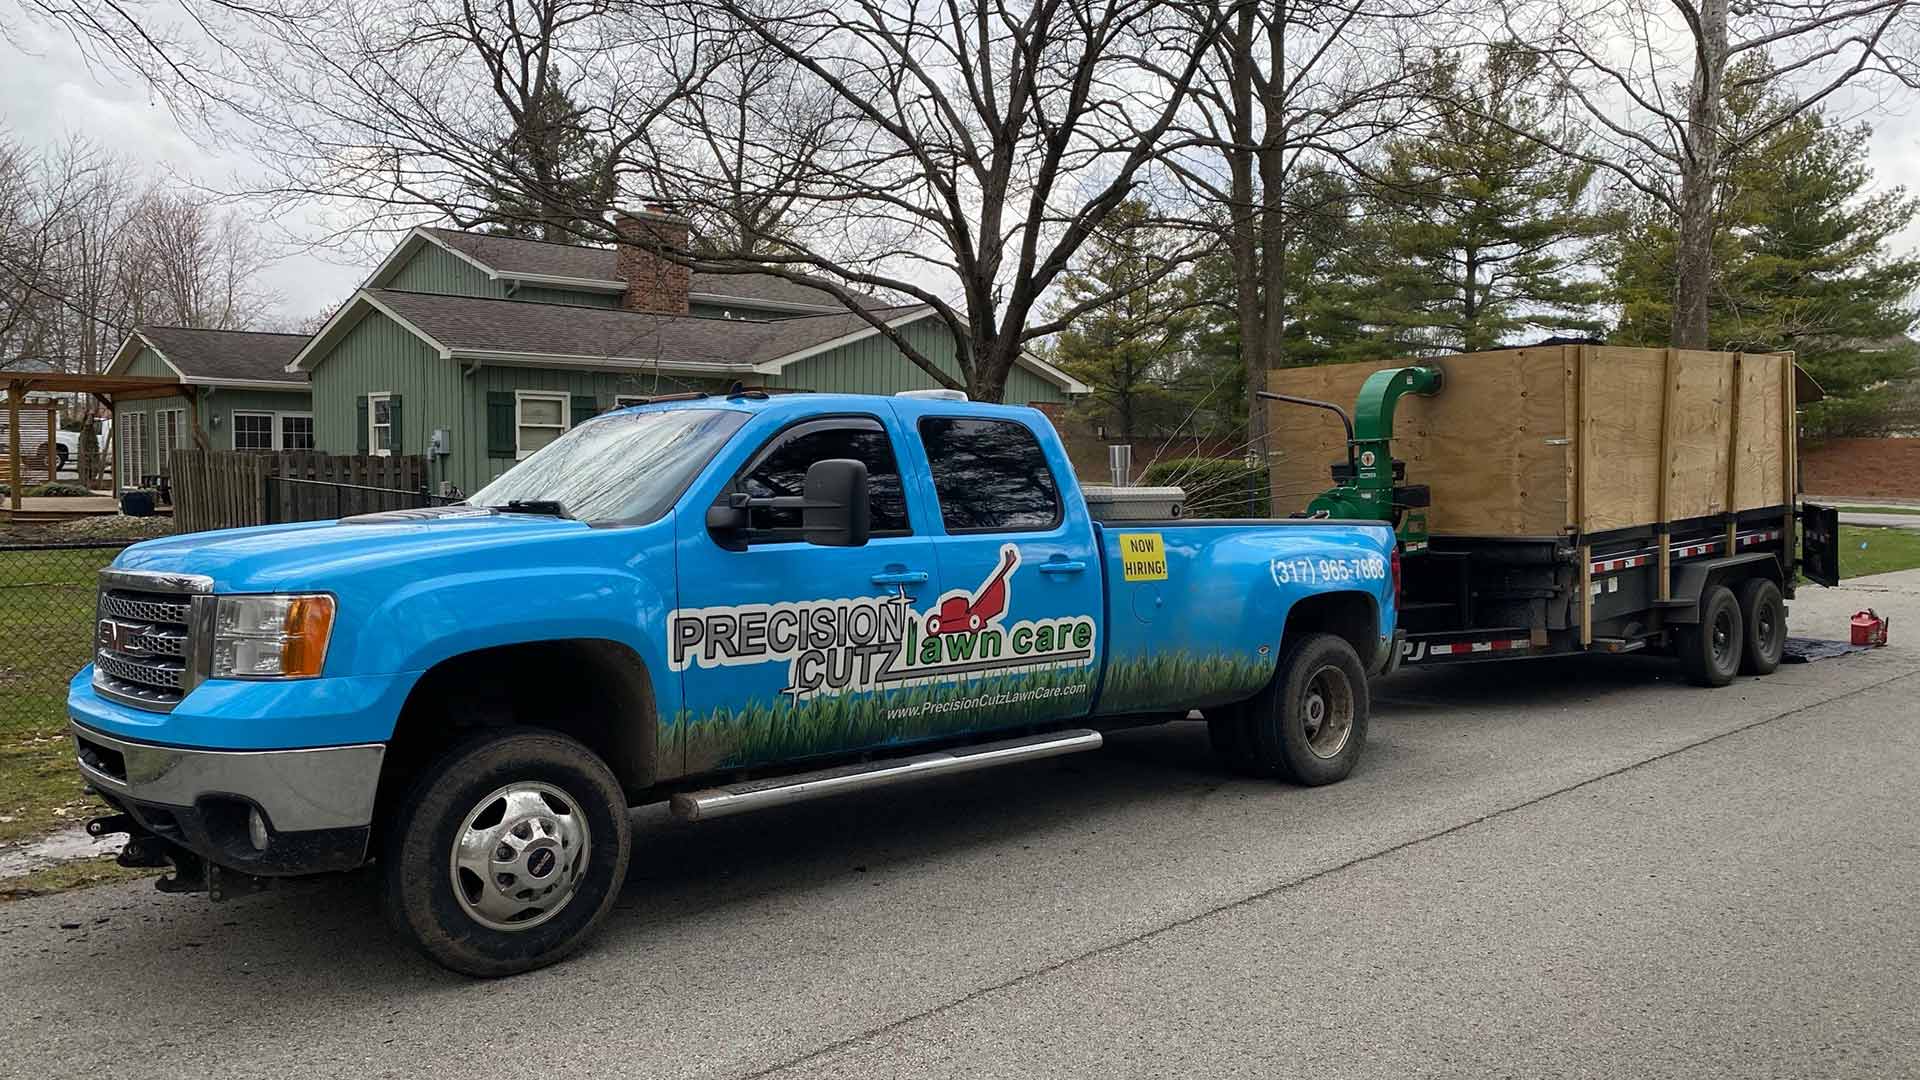 Lawn service vehicle in Fishers, Indiana.